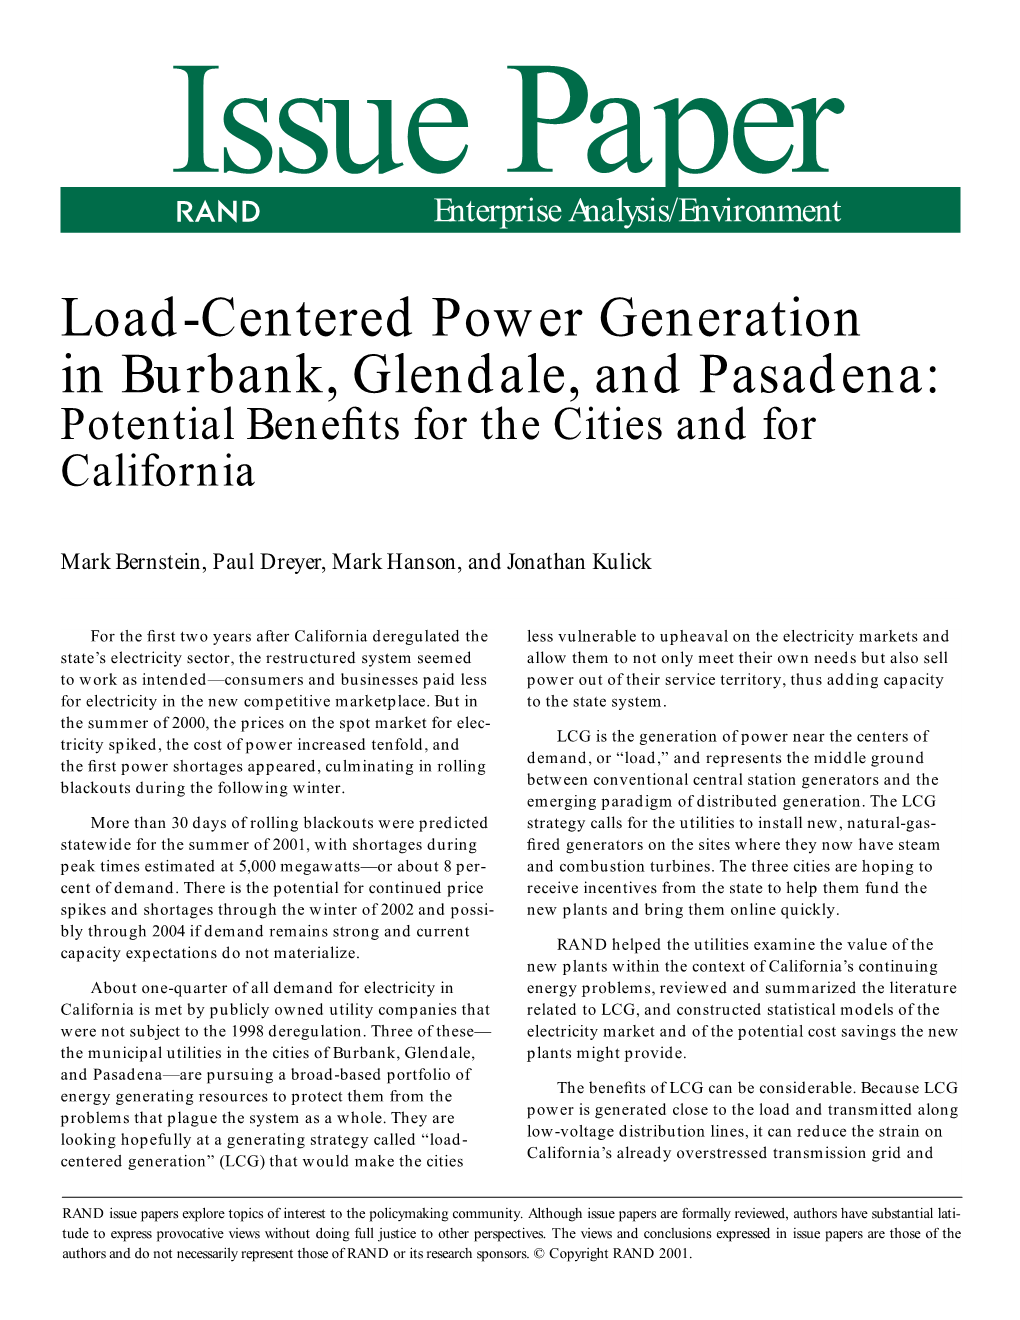 Load-Centered Power Generation in Burbank, Glendale, and Pasadena: Potential Beneﬁts for the Cities and for California